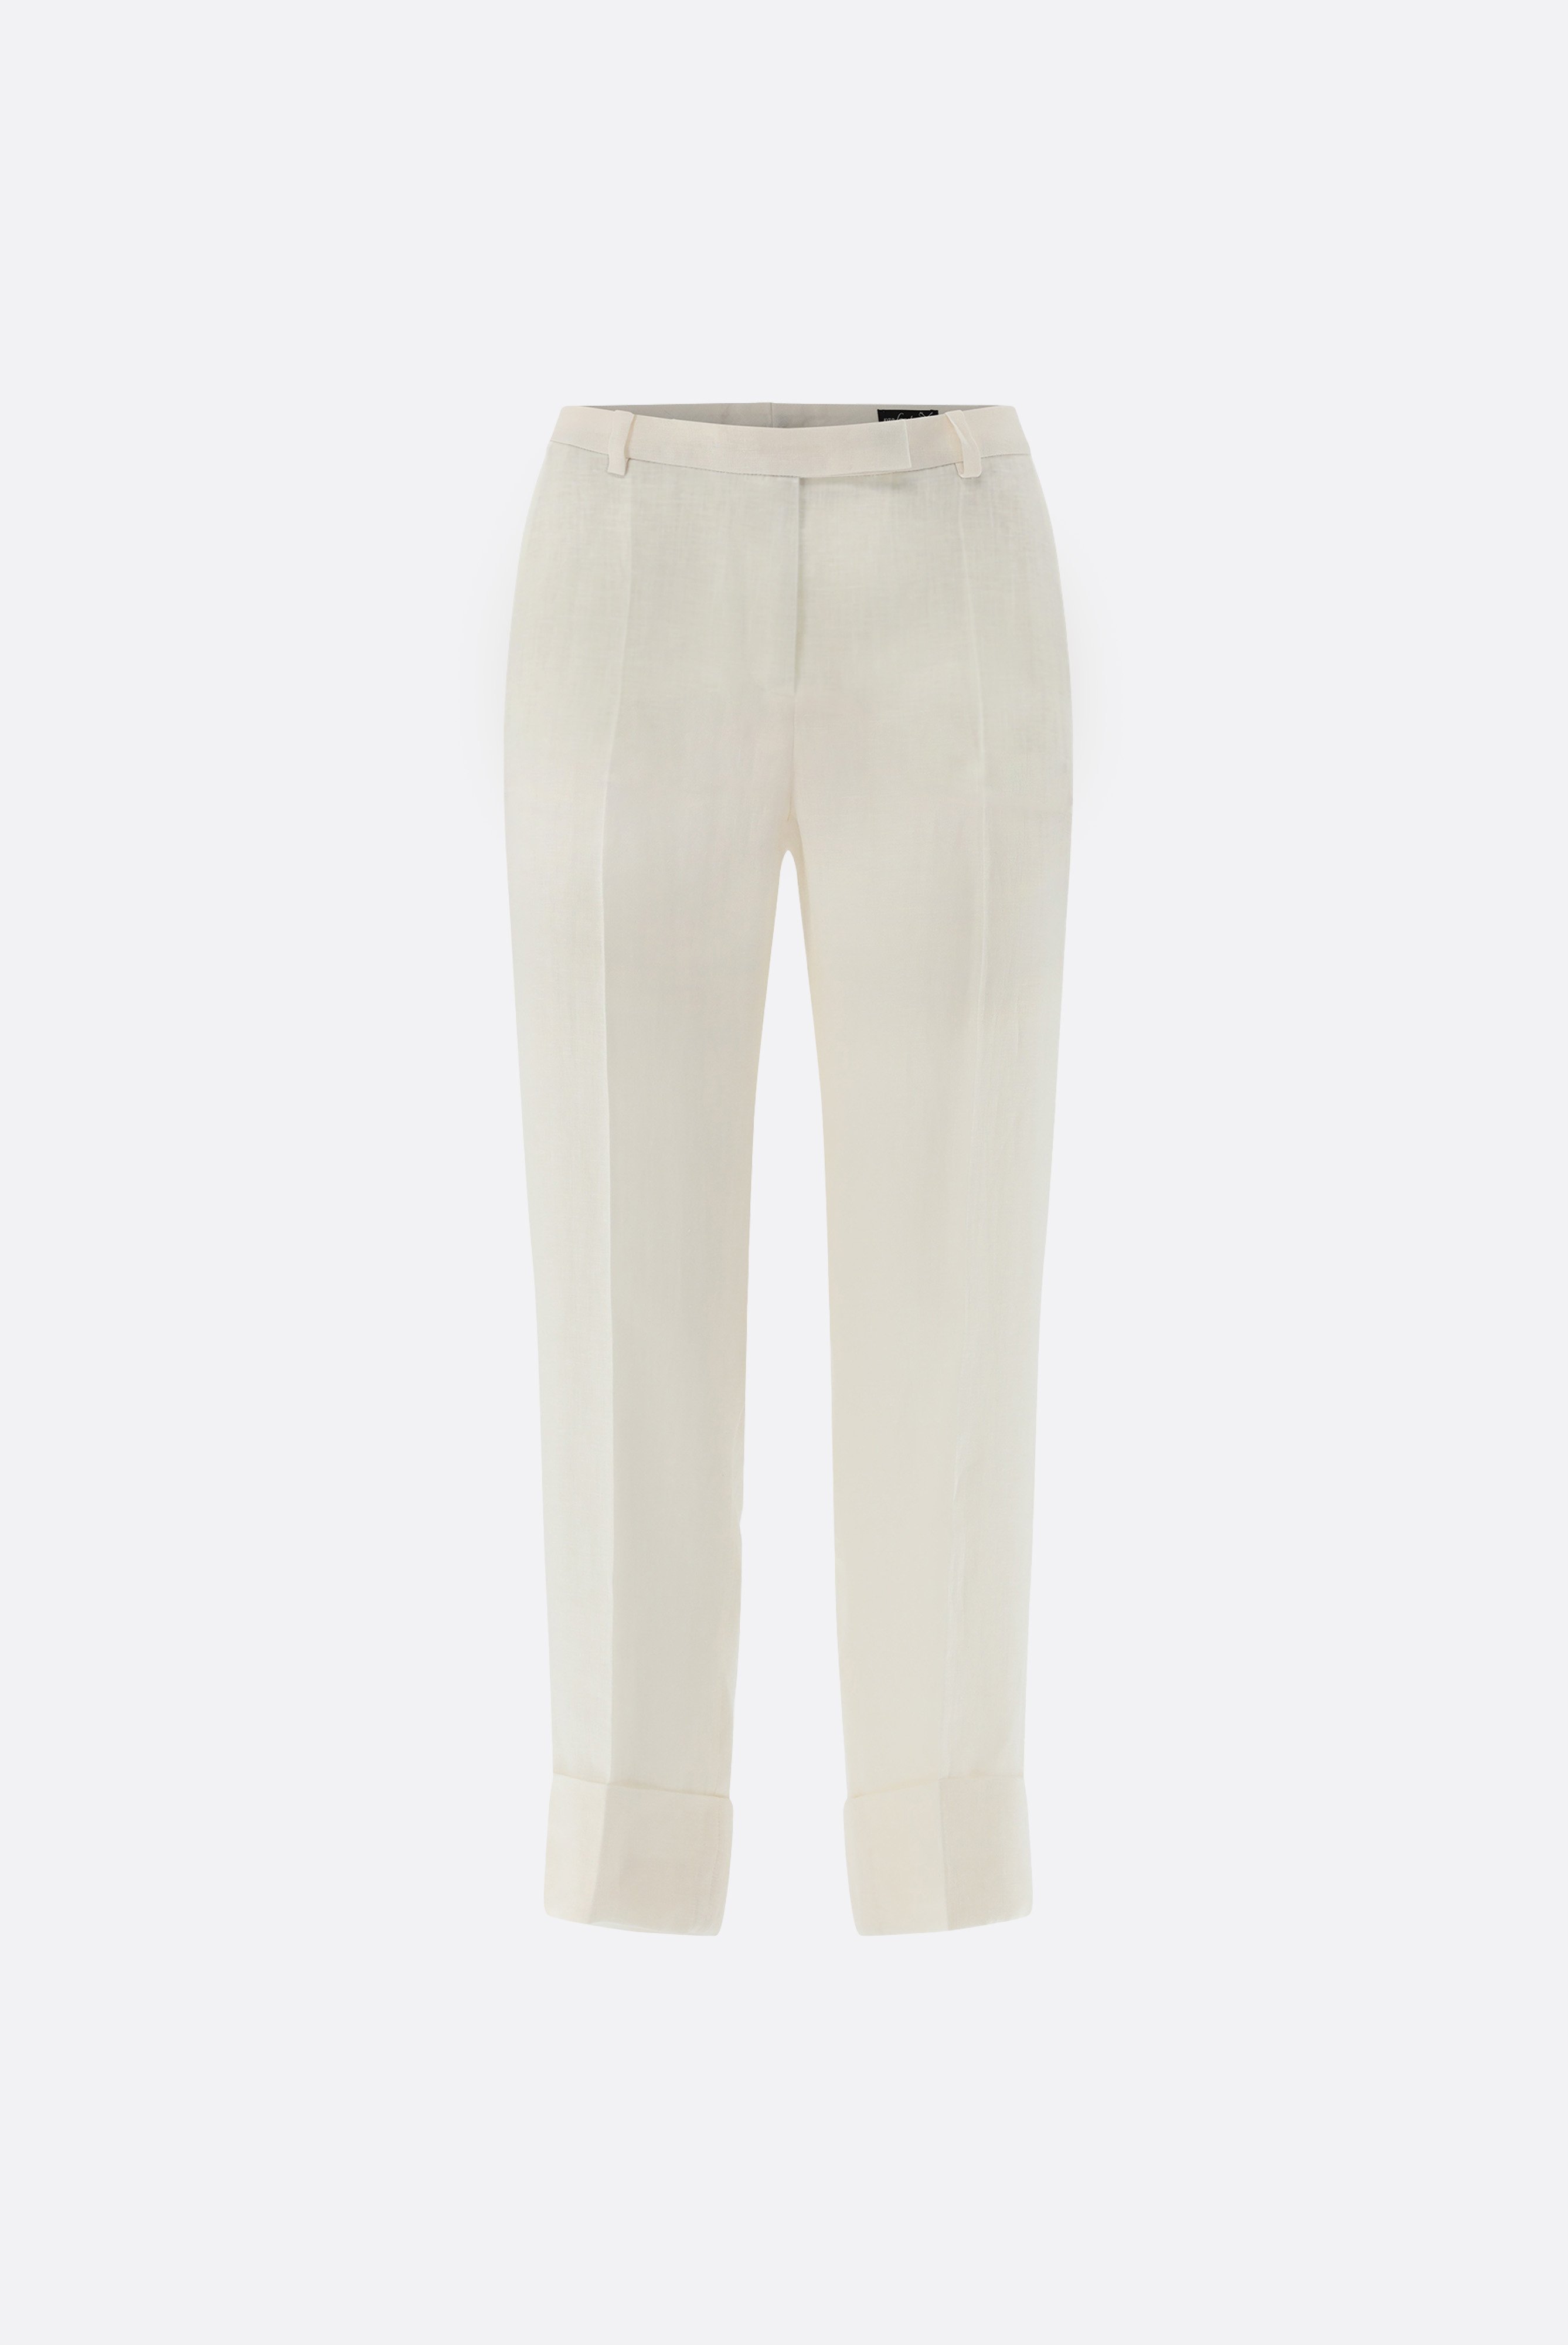 Jeans & Trousers+Linen Pants with Cuff+05.657V..H50555.110.36